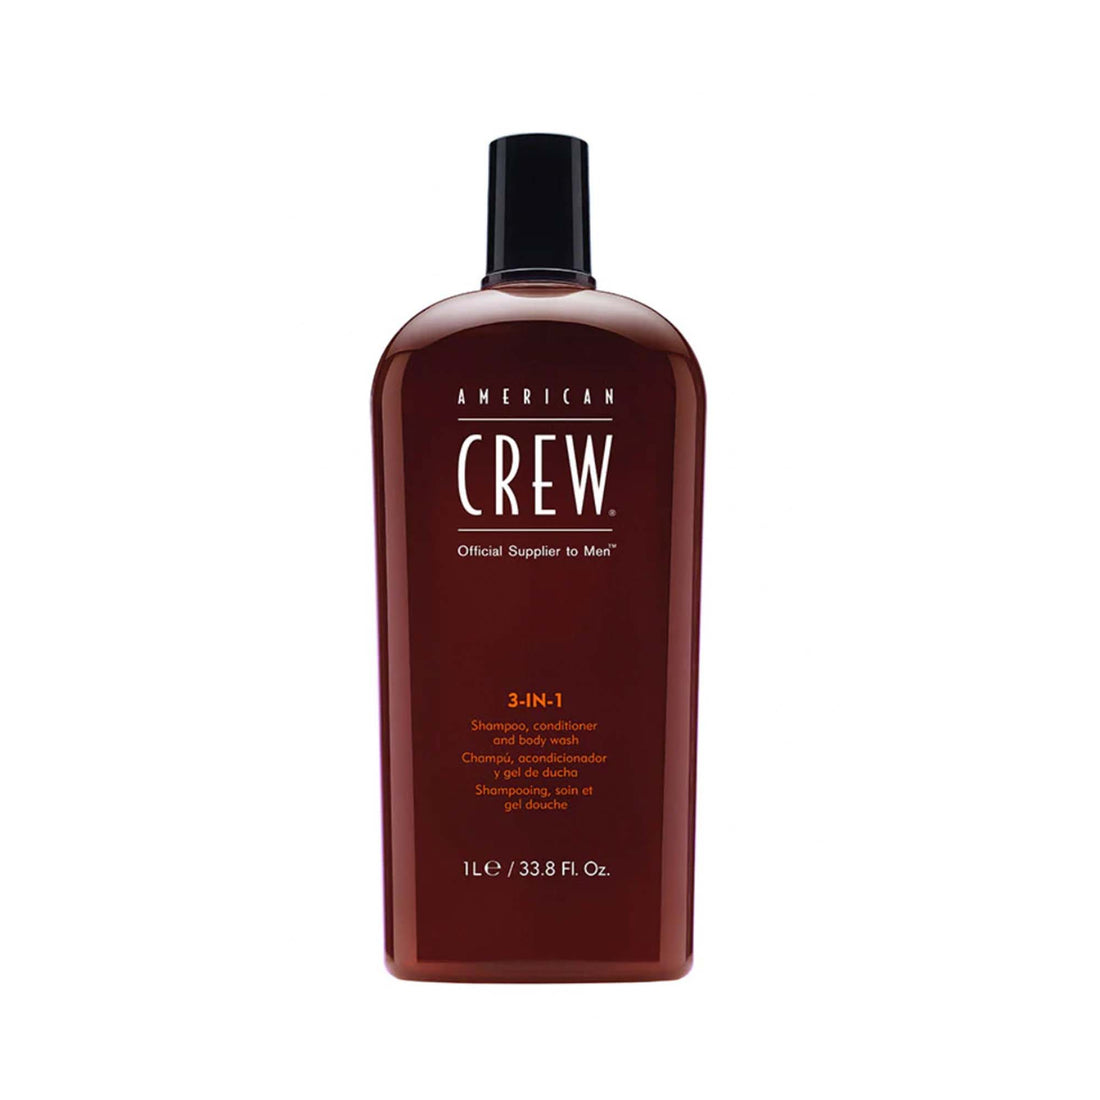 Simplify Your Routine with American Crew 3-IN-1 Shampoo, Conditioner and Body Wash | Pismo Beach Essence Beauty Supply